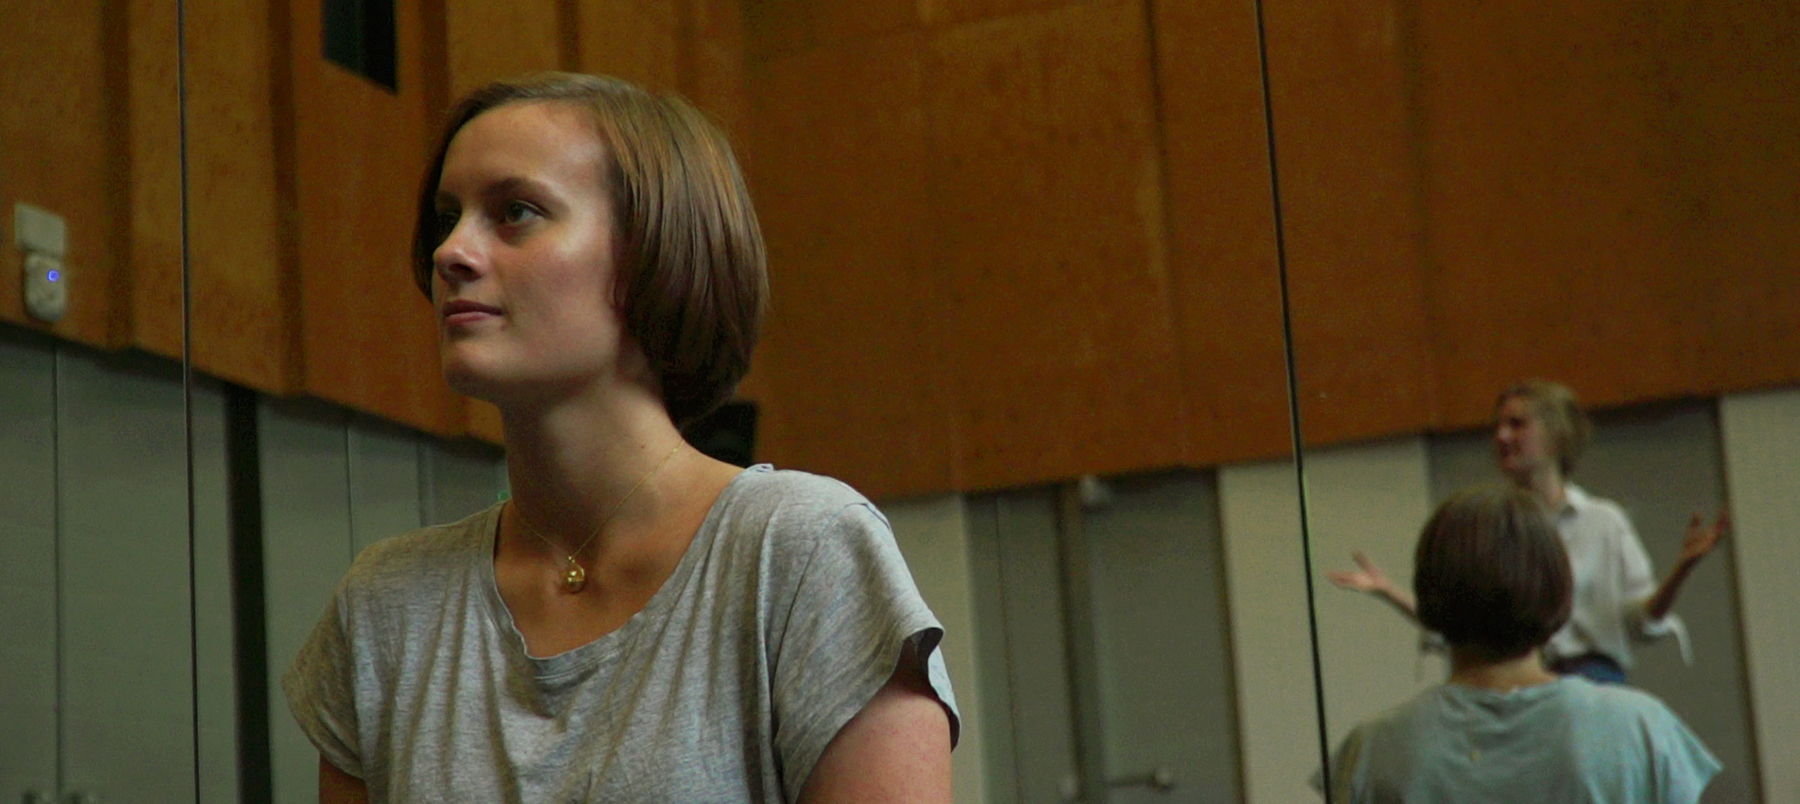 Young woman in grey t-shirt sitting in rehearsal room